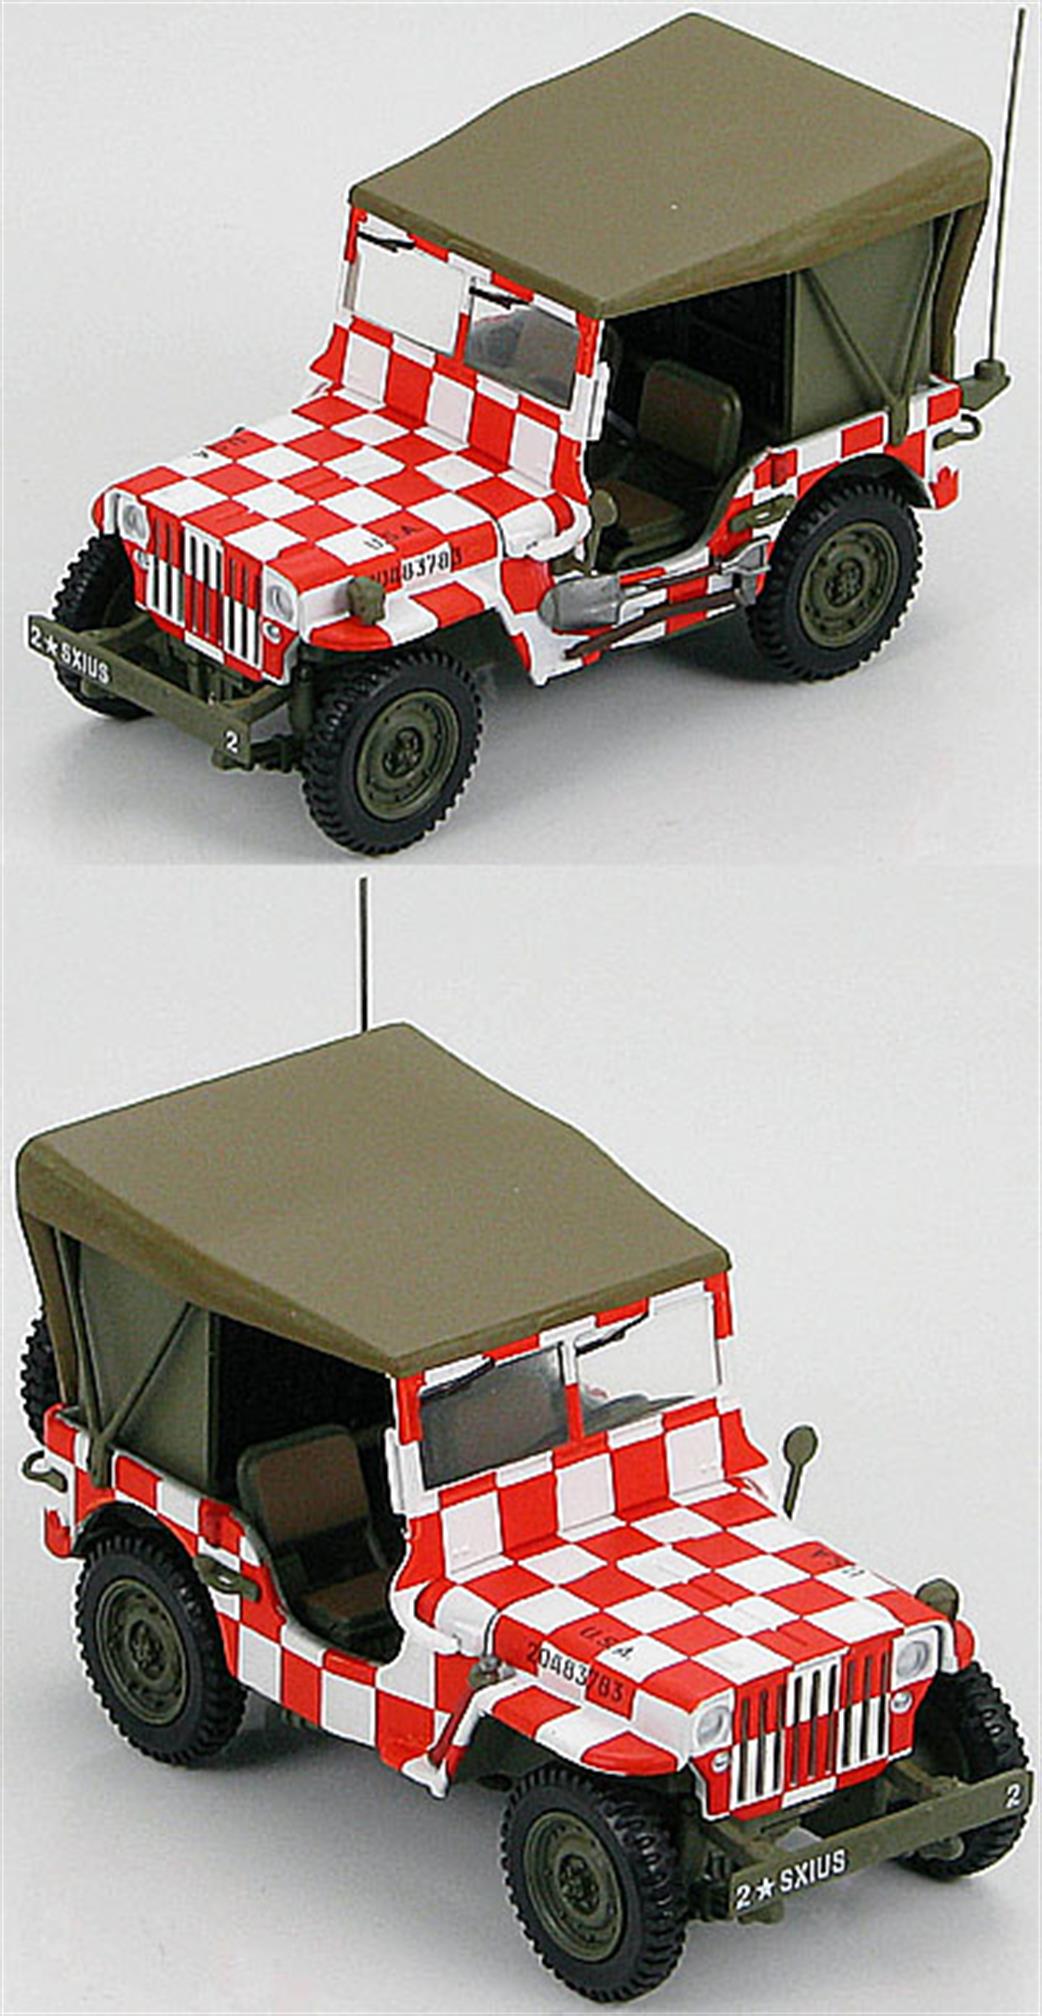 Hobby Master 1/48 HG1604 Willys MB Jeep US Army Air Force, Iowa 